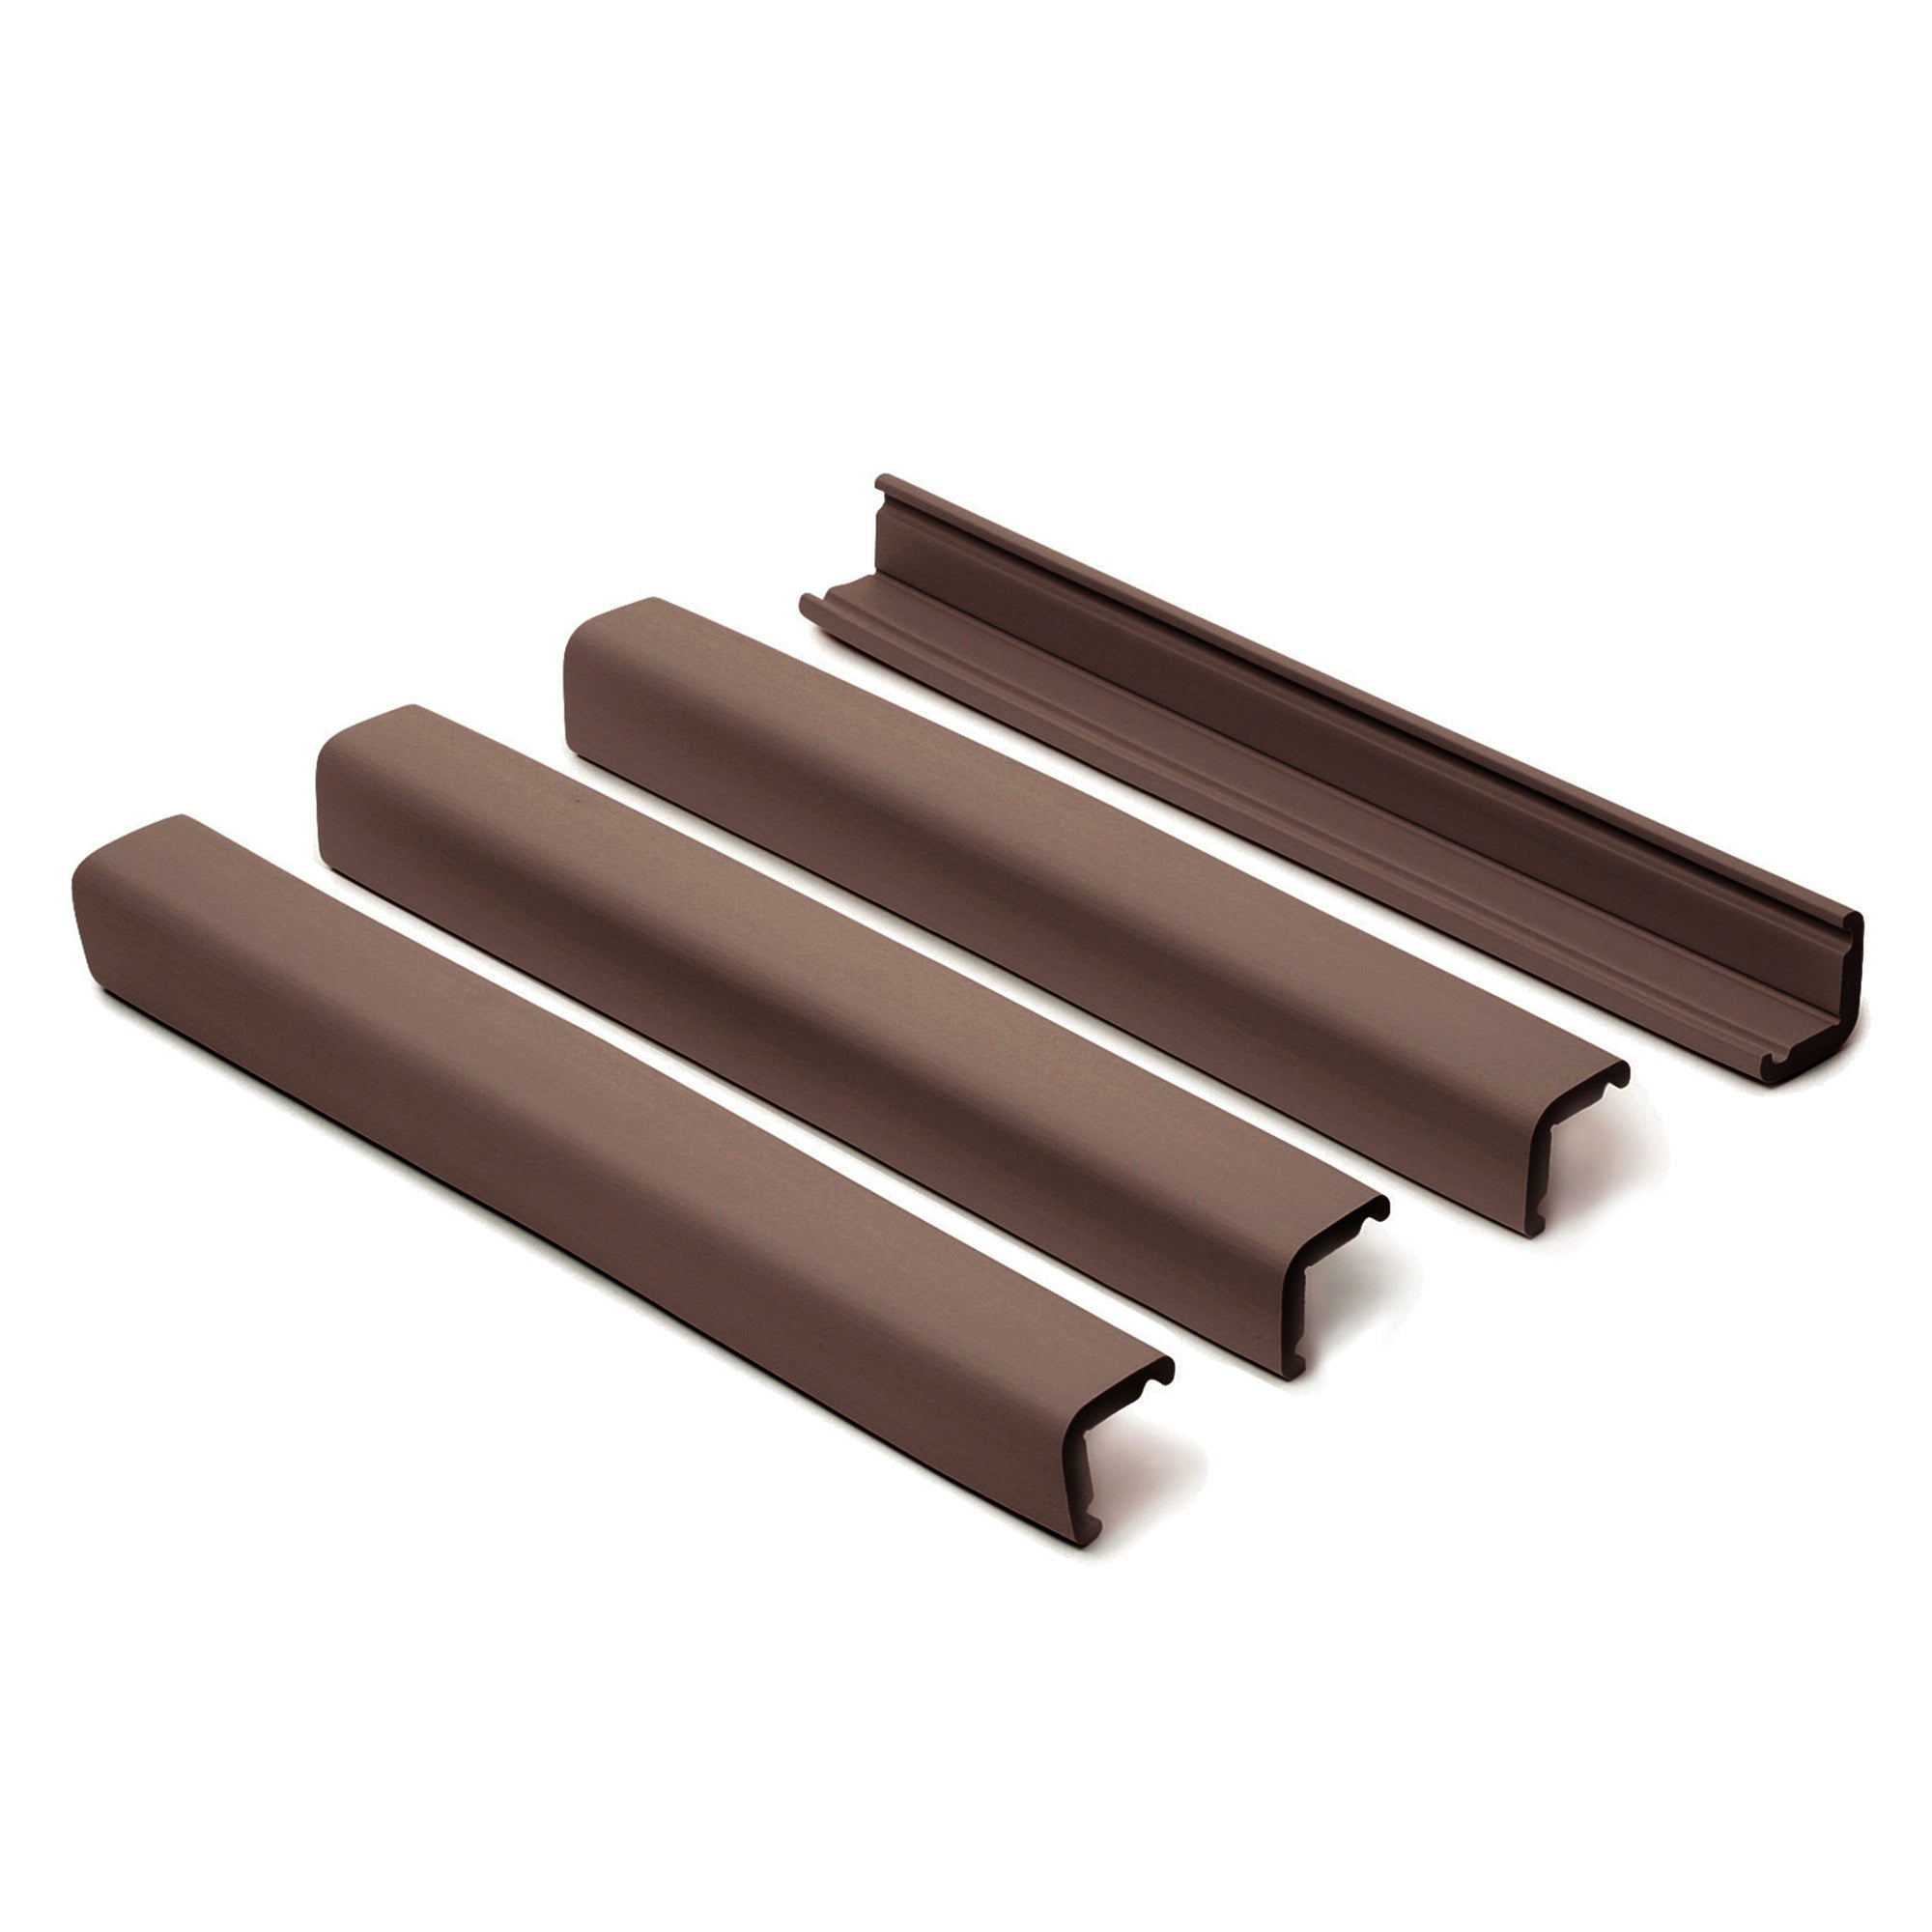 Table Edge Guards - Protect Your Child from Sharp Edges - Prince